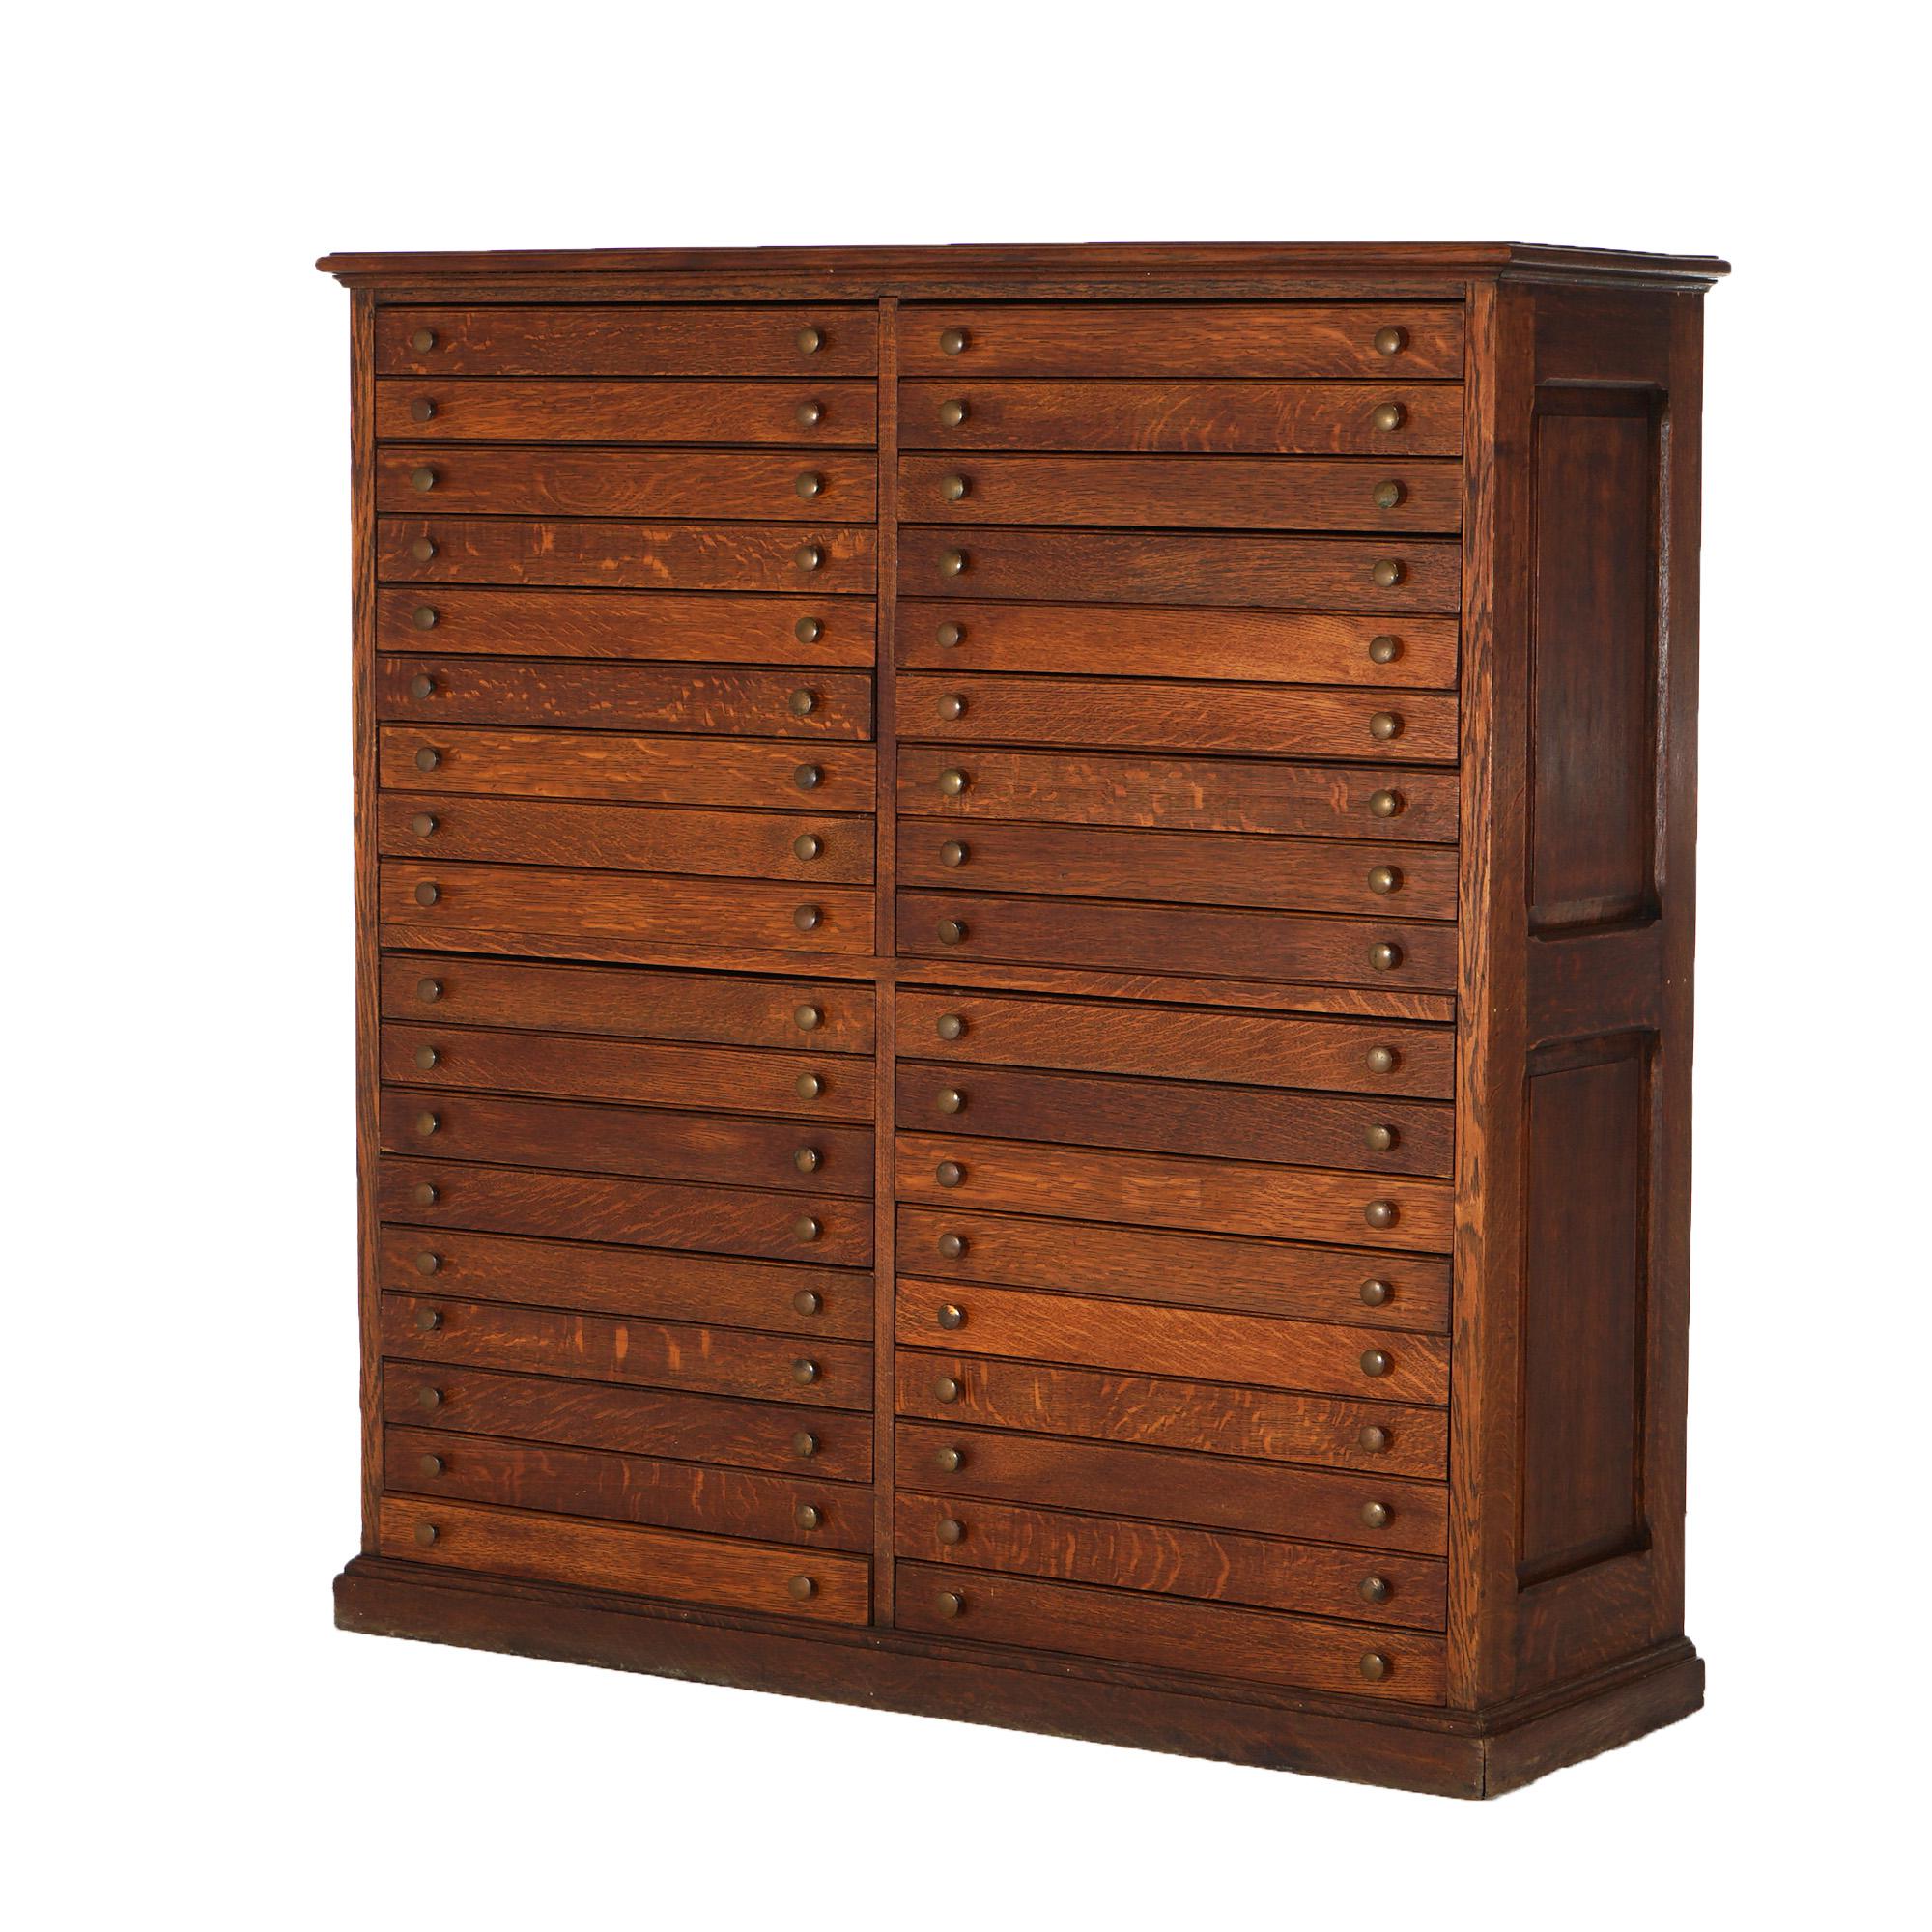 ***Ask About Reduced In-House Shipping Rates - Reliable Service & Fully Insured***

Antique Country Store 36-Drawer Paneled Oak File or Map Cabinet C1920

Measures - 53.75